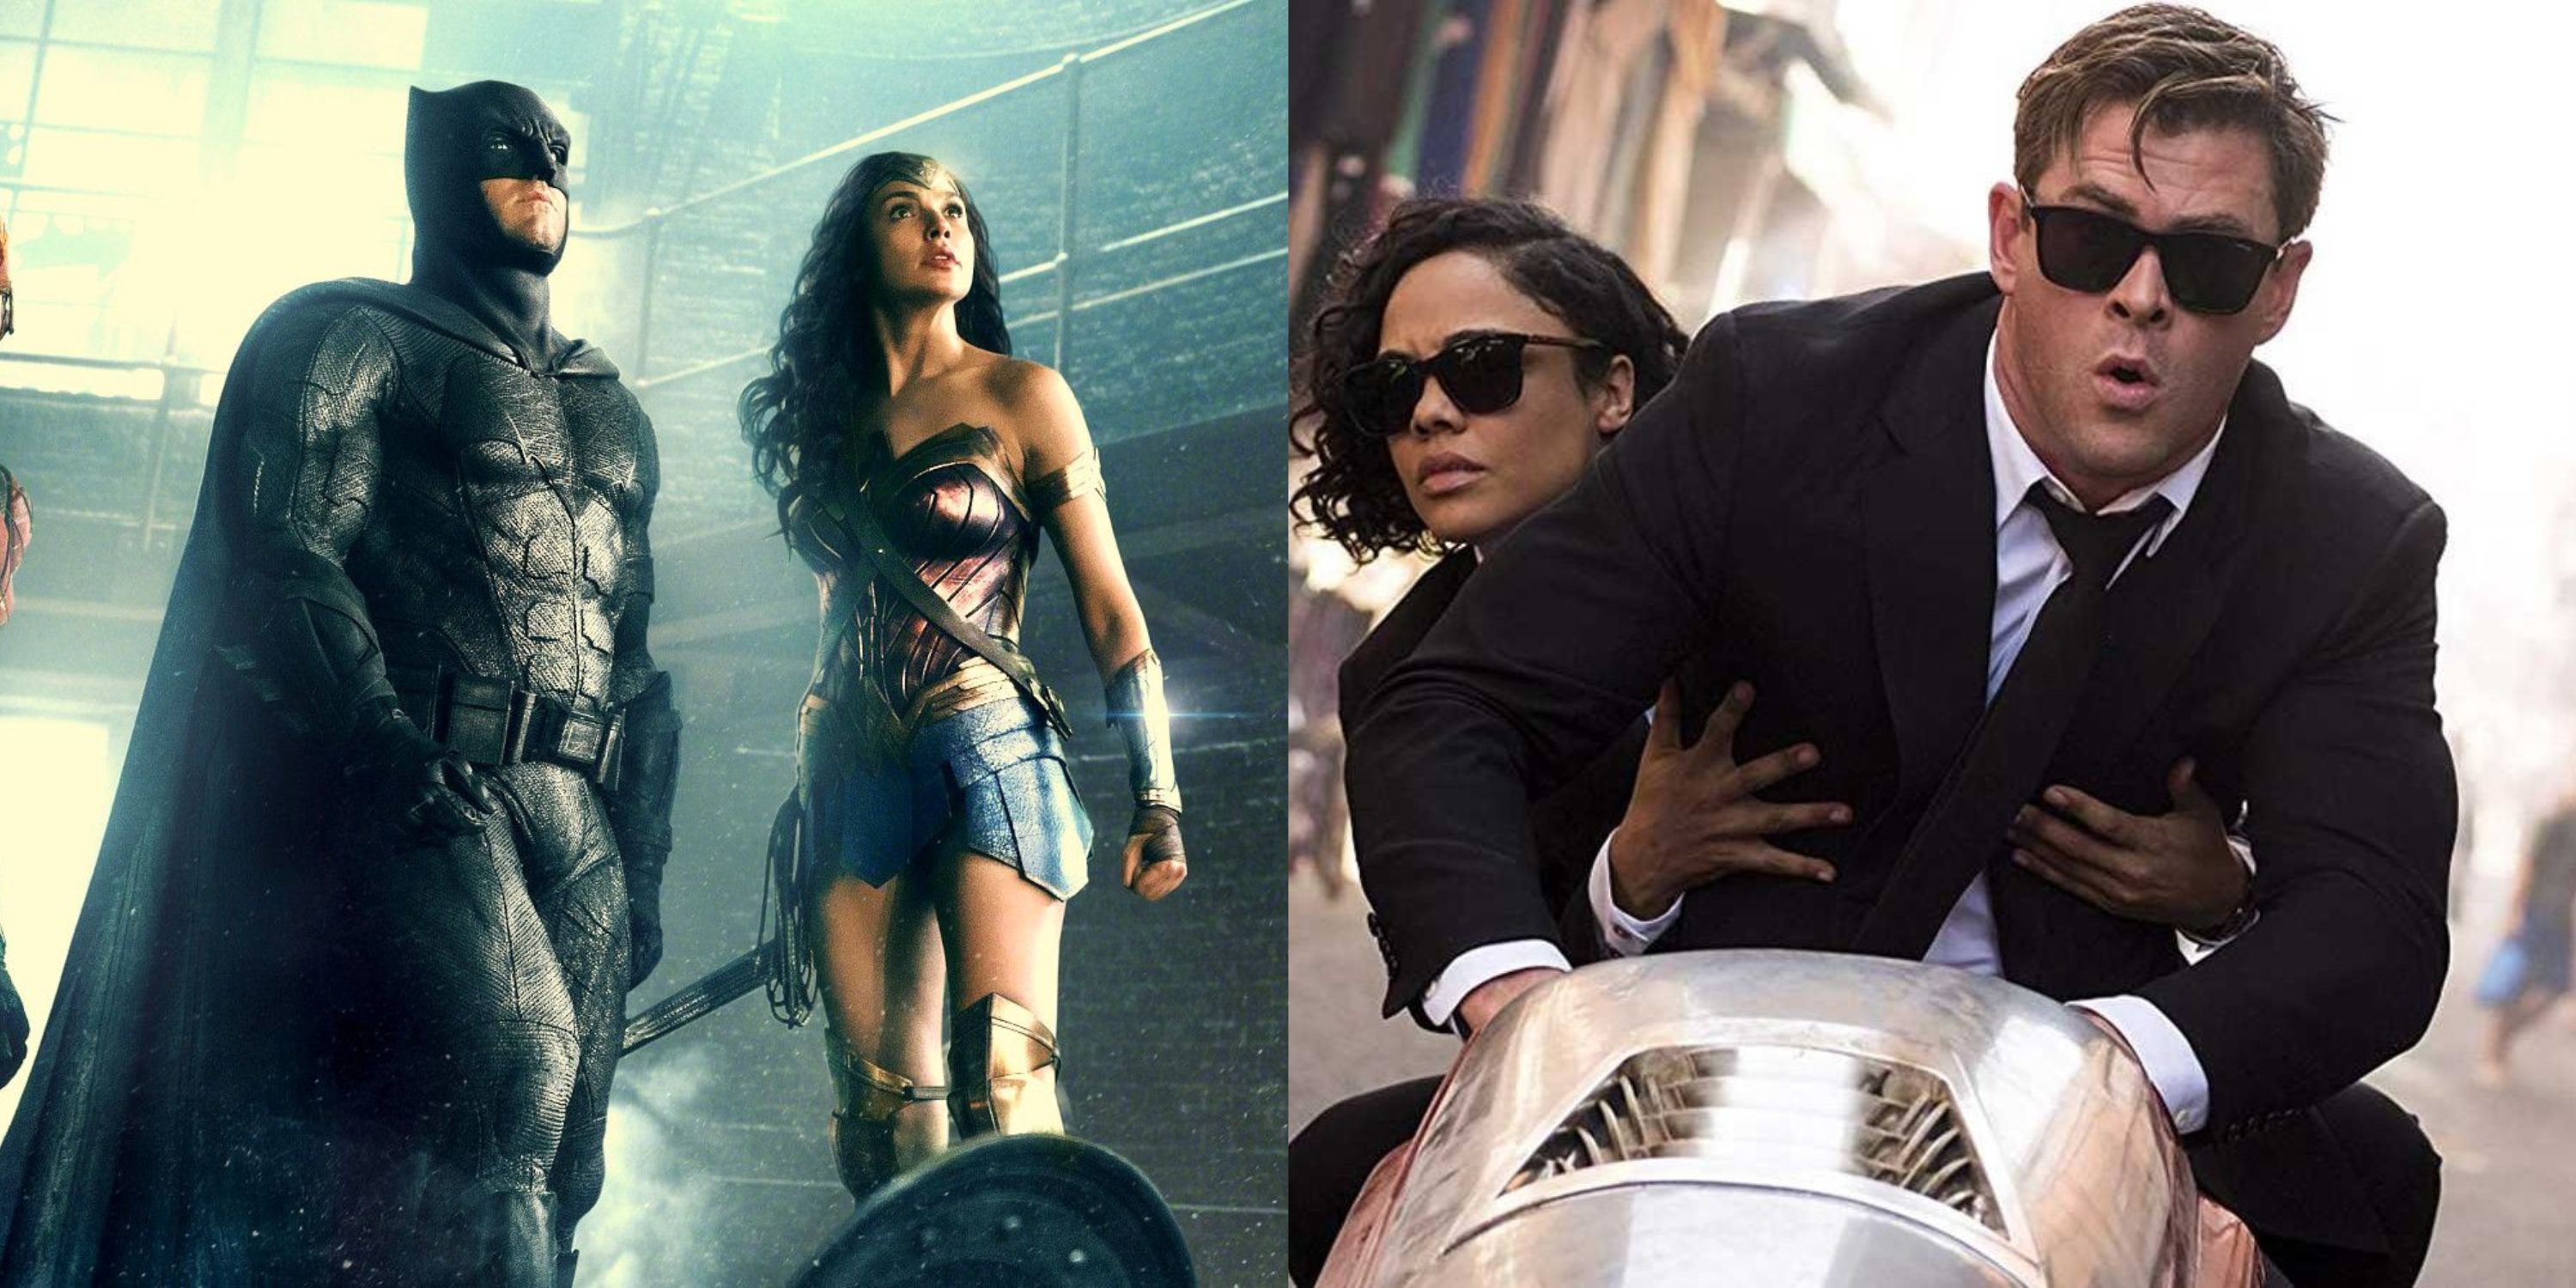 Featured image Batman and Wonder Woman in Justice League and Chris Hemsworth and Tessa Thompson on a motorbike in Men in Black International